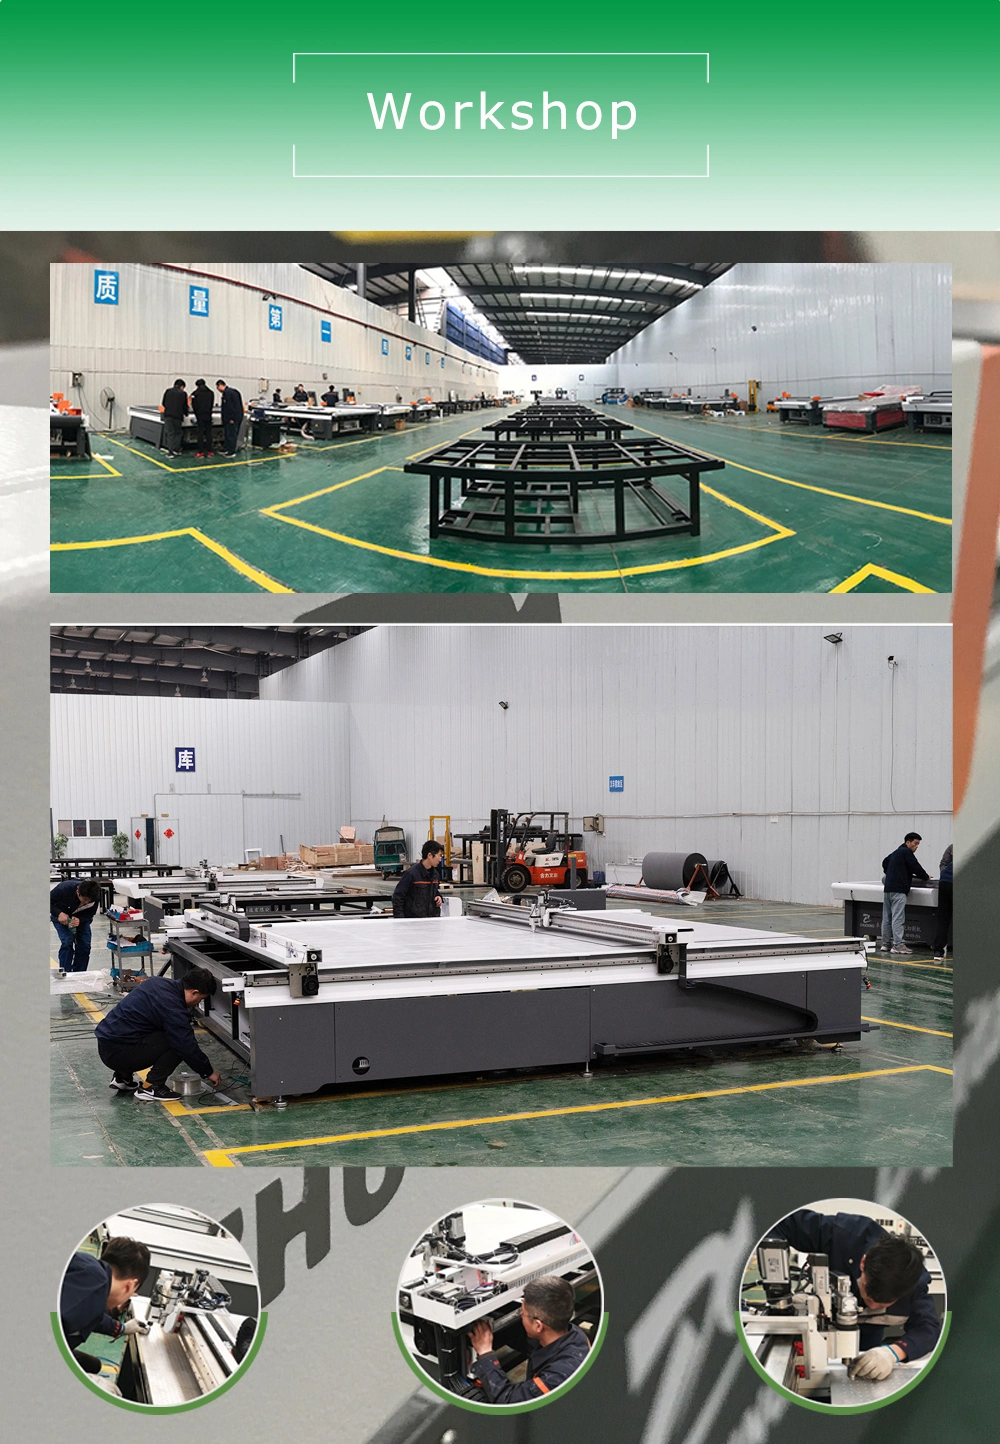 Asbestos Non-Asbestos Rubber Graphite Cork PTFE Gasket Material Cutting Machine Digital CNC Gaskets Making Equipment Ce Good Quality Factory Price